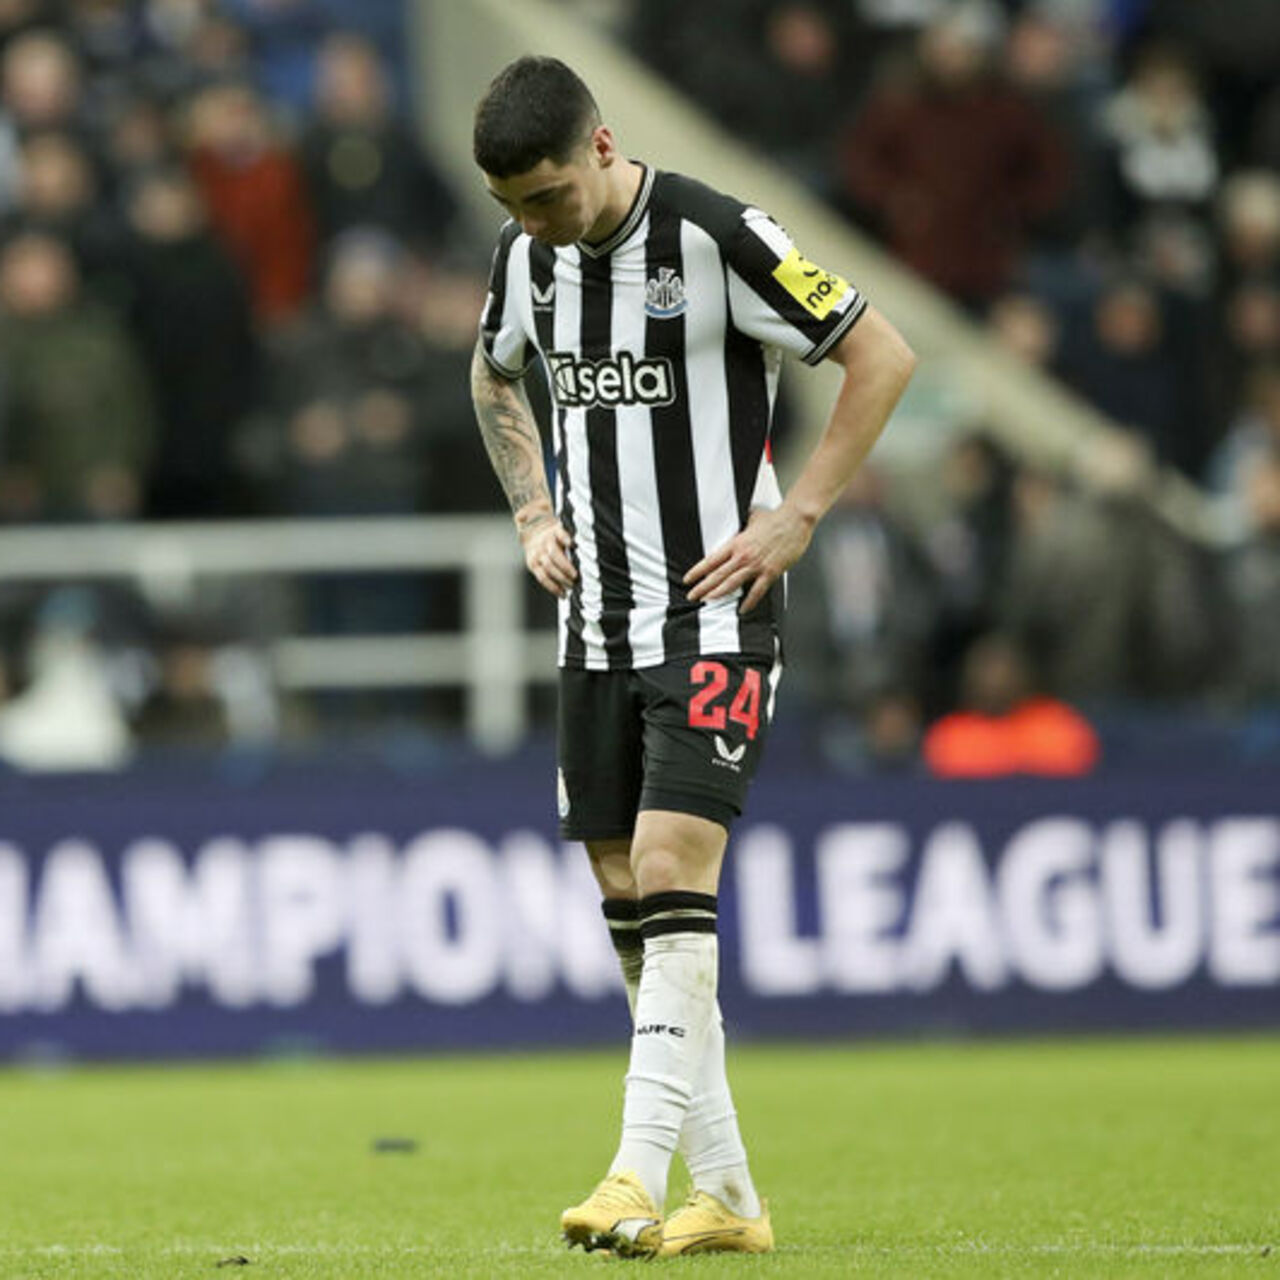 Newcastle United lost at home to Nottingham Forest